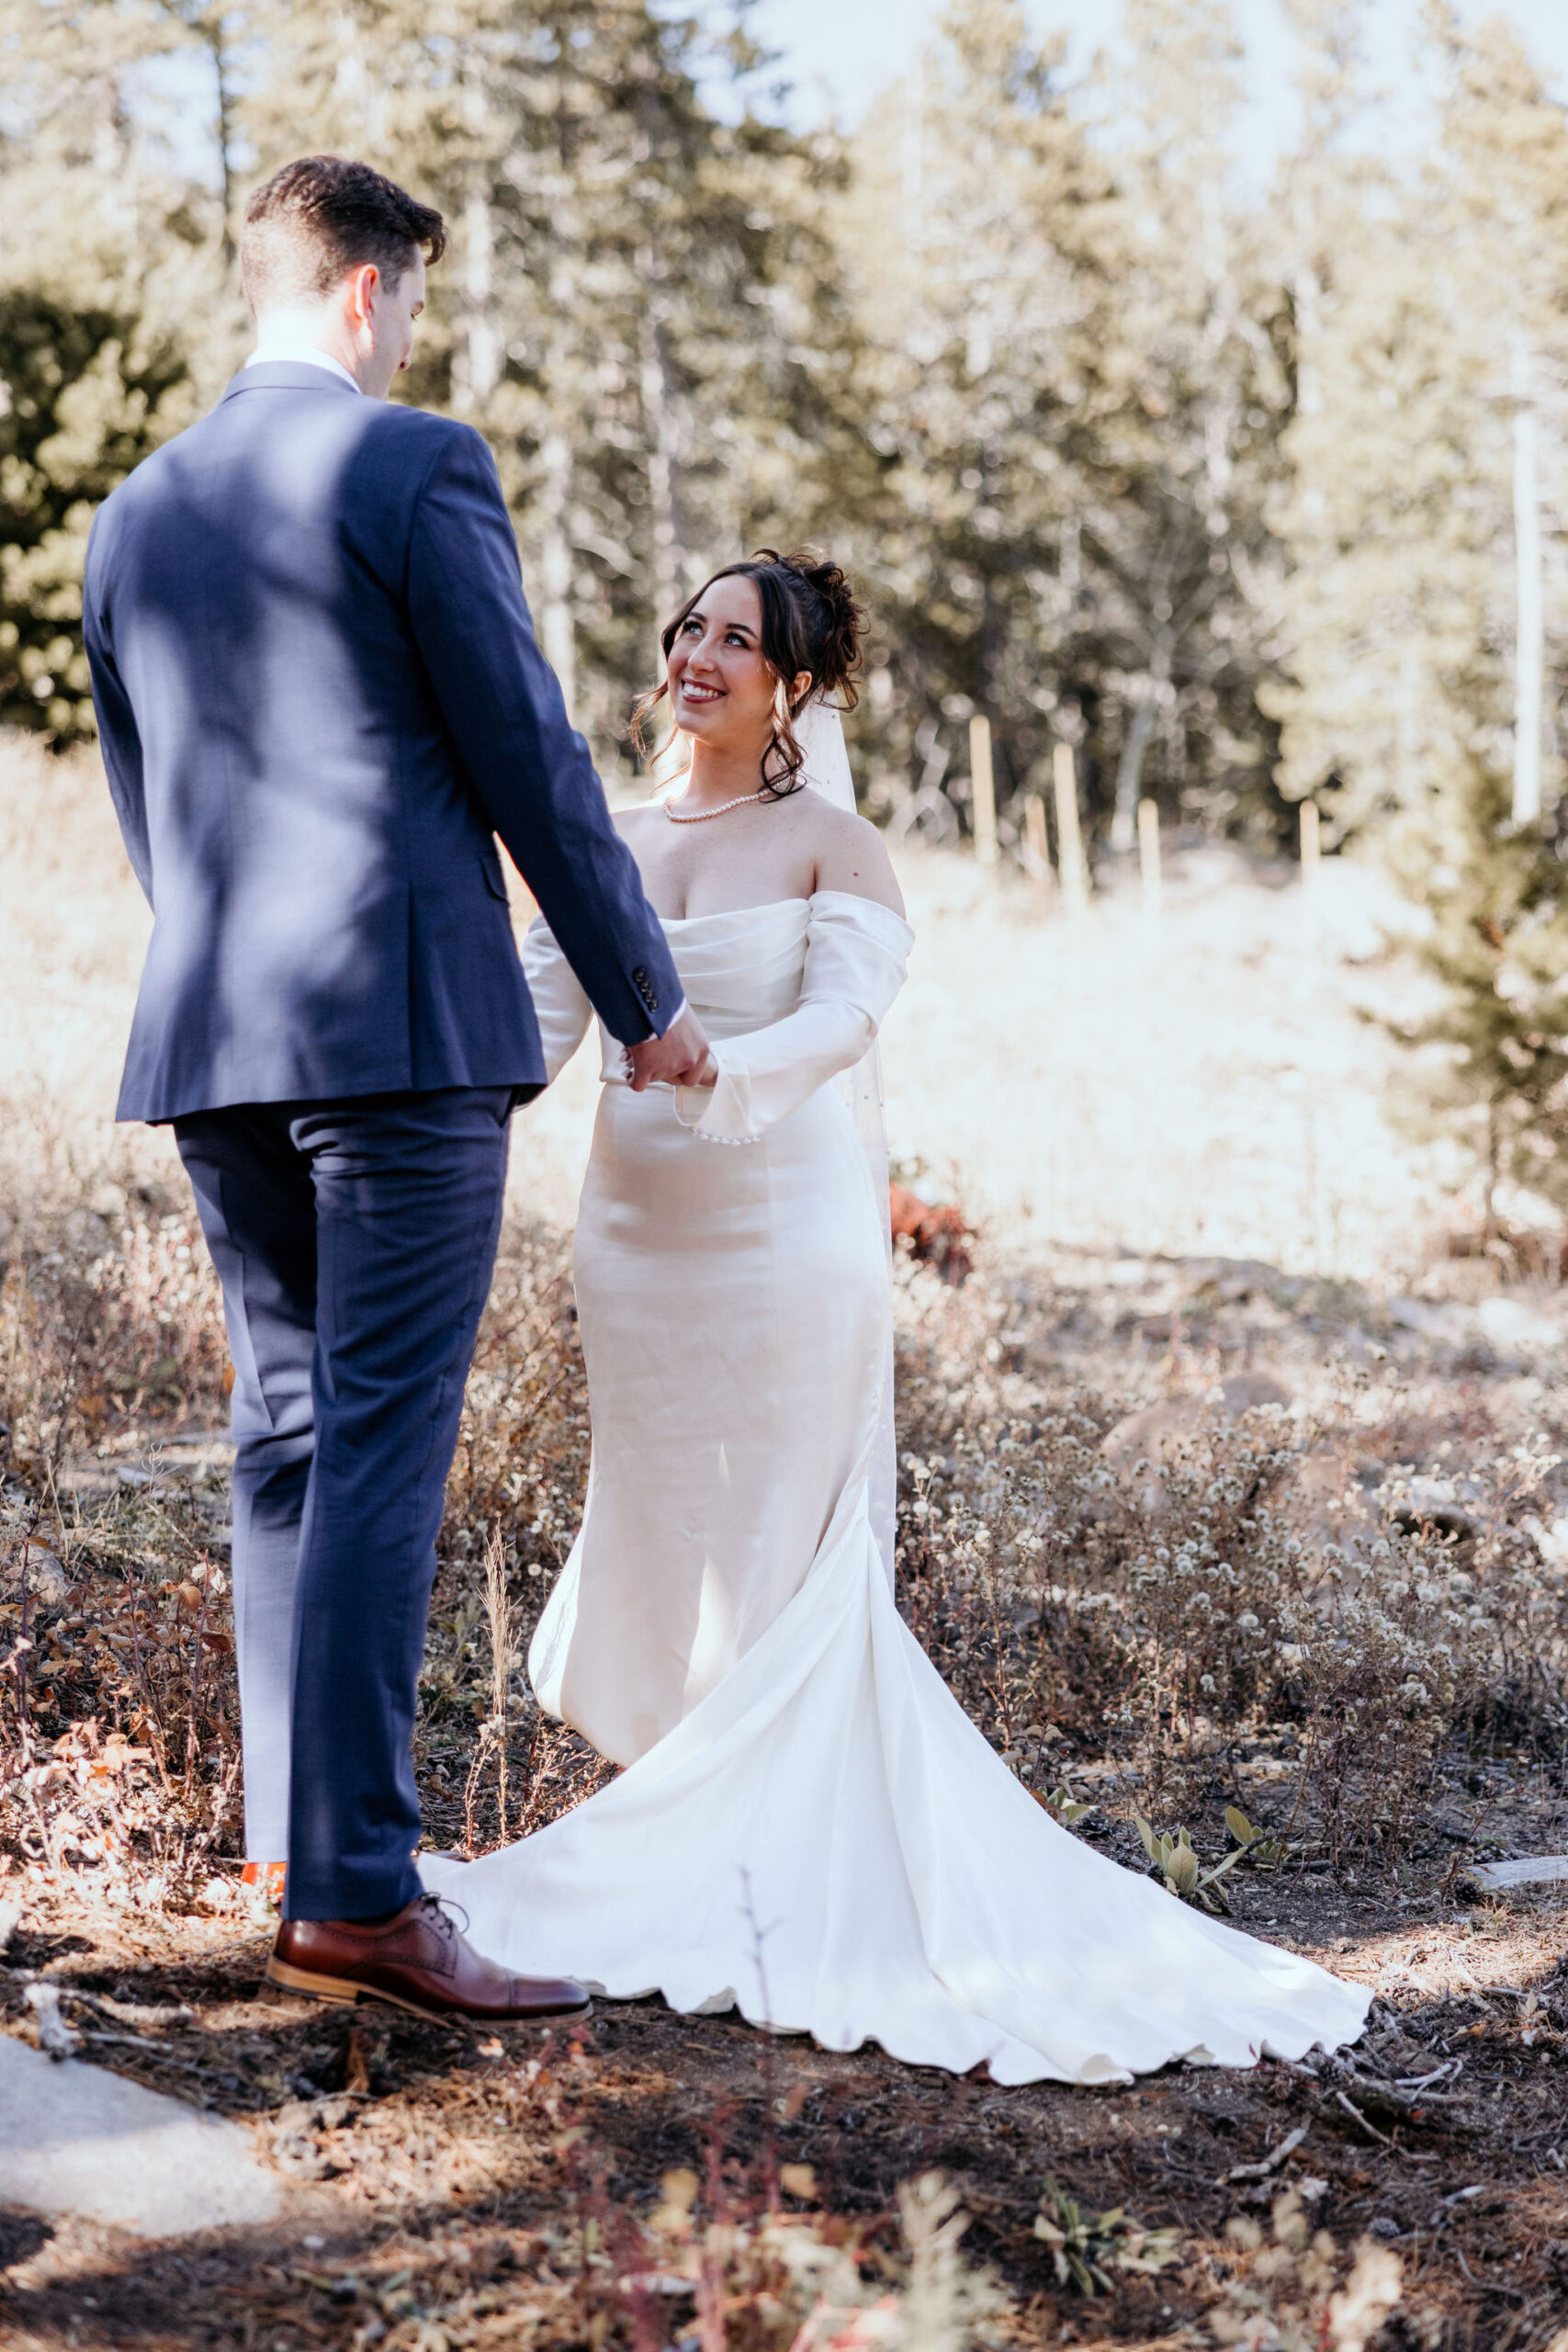 bride looks up and smiles at groom during airbnb elopement photos in the colorado mountains.